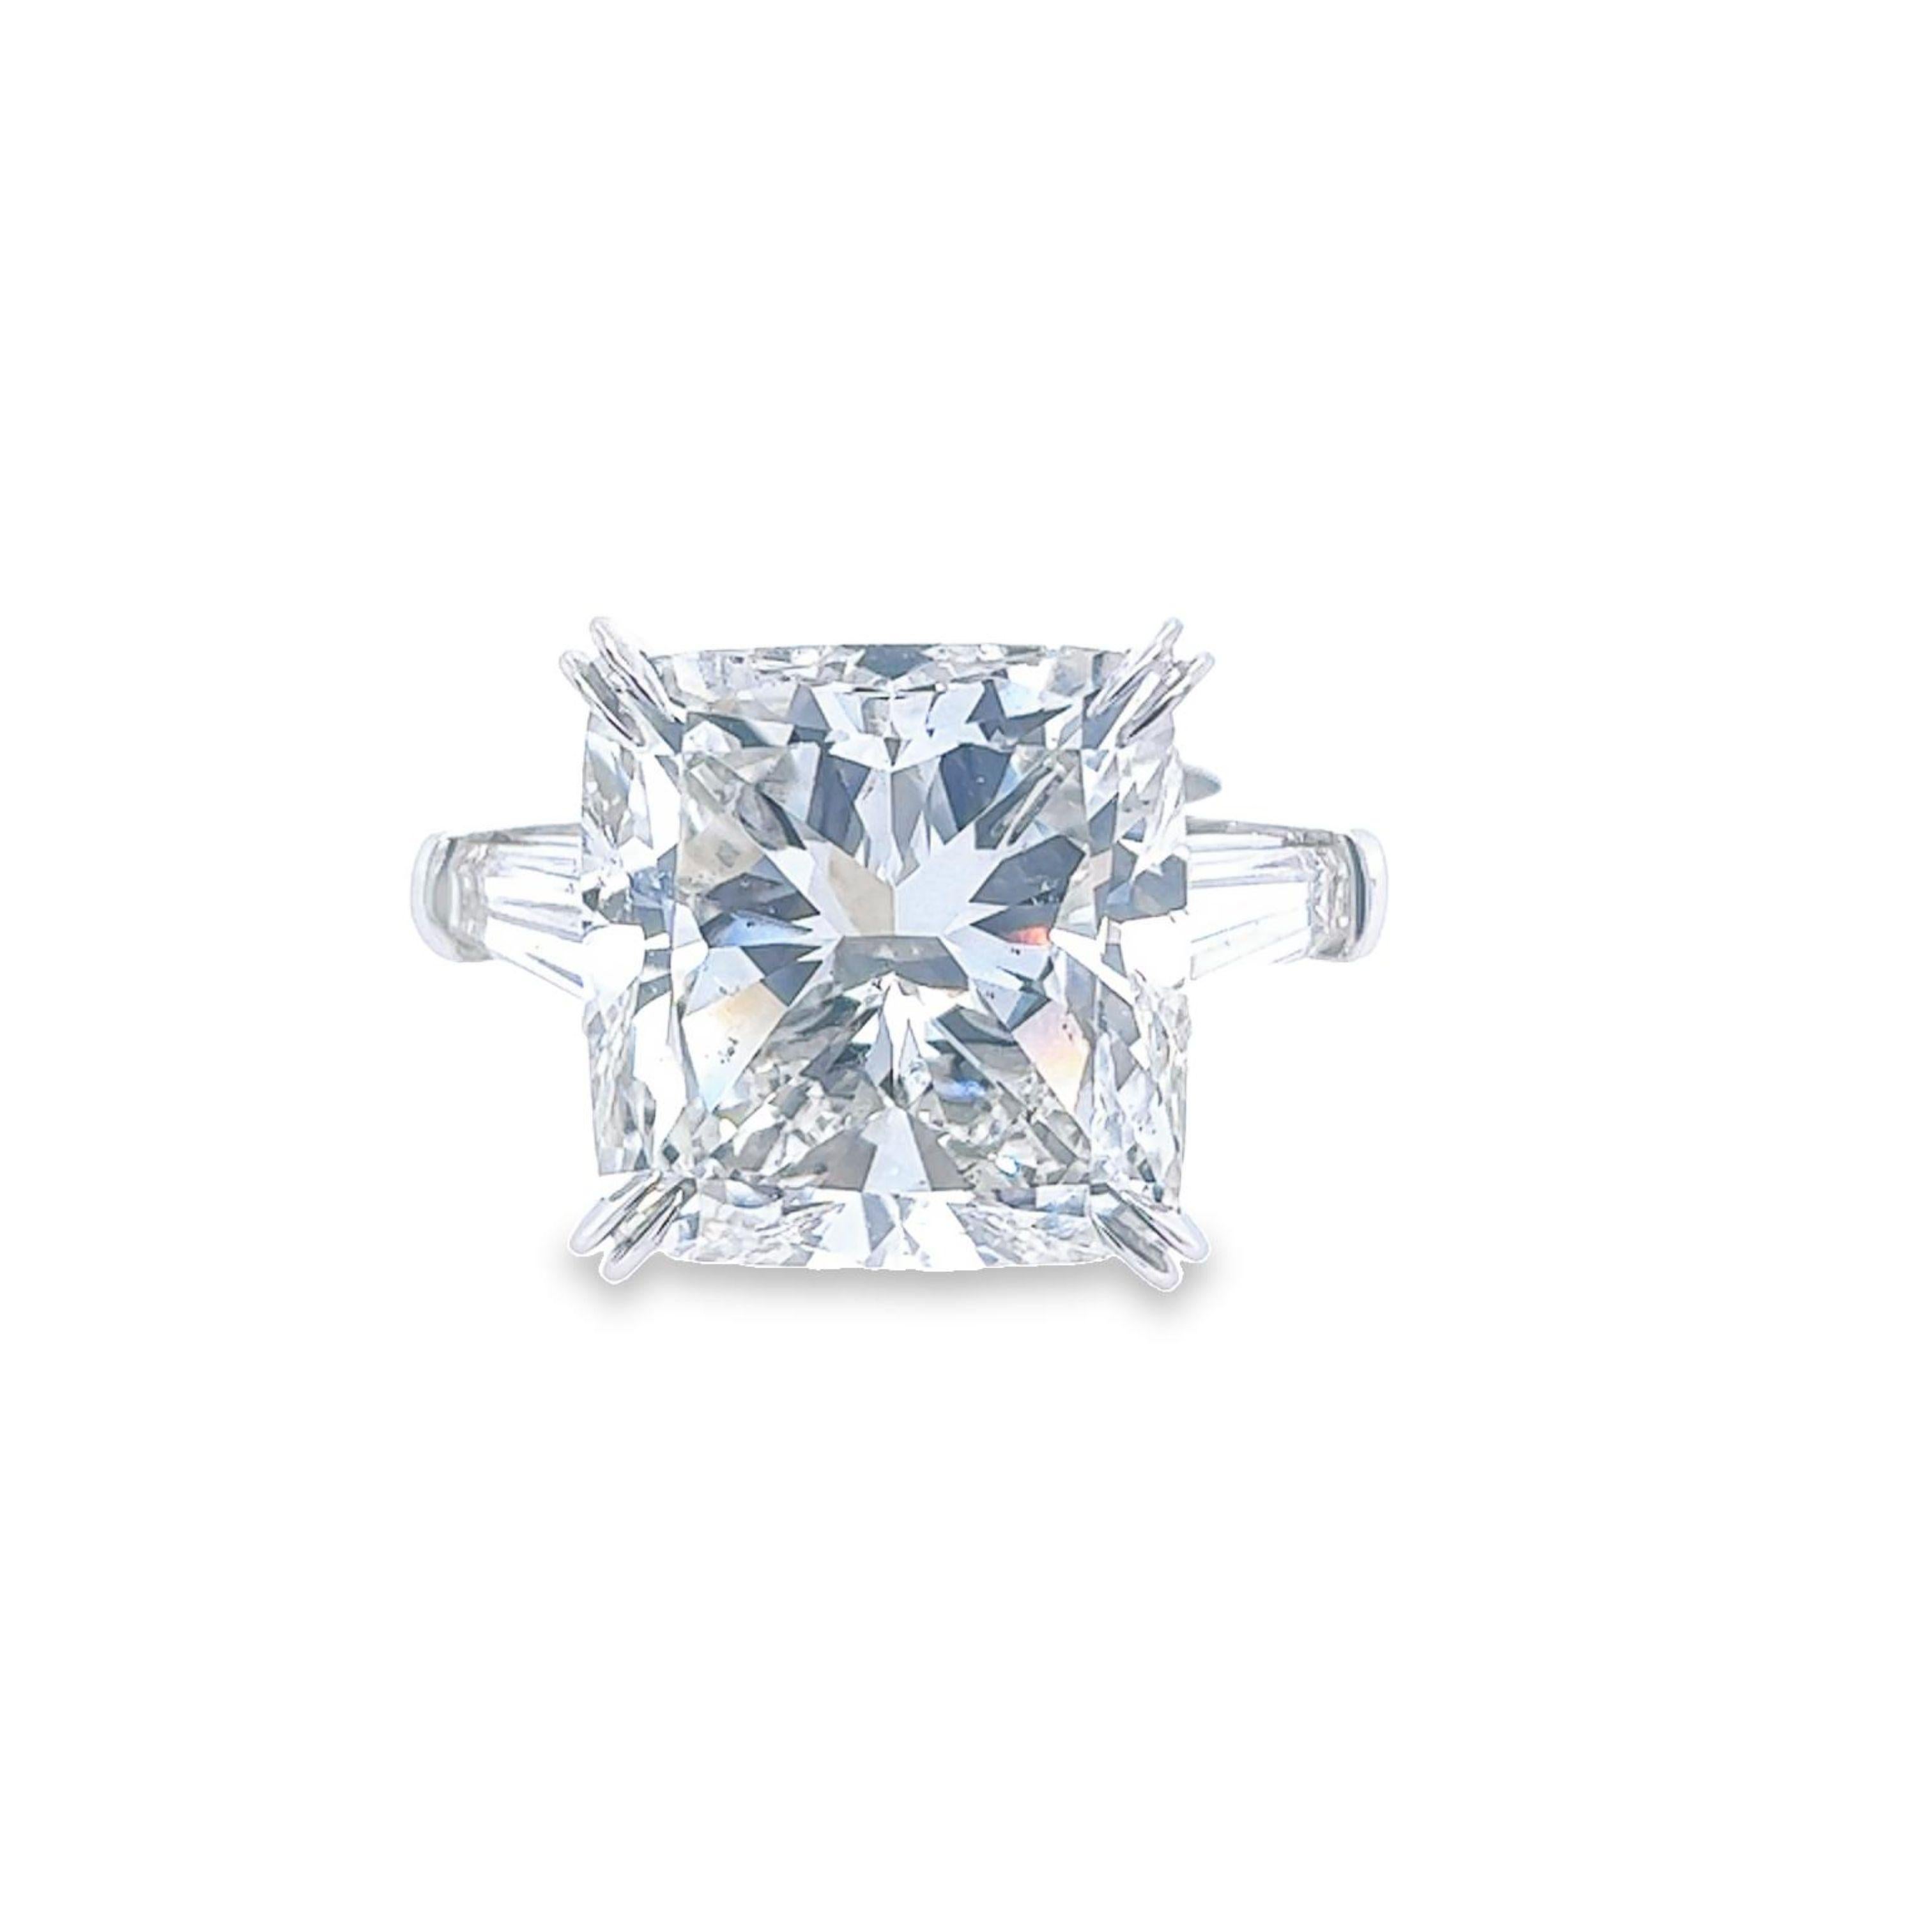 Rosenberg Diamonds & Co. 15.71 carat Cushion cut I color SI2 clarity is accompanied by a GIA certificate. This spectacular 
cushion is full of brilliance and an exceptional SI2 that is set in a handmade platinum setting with perfectly matched pair